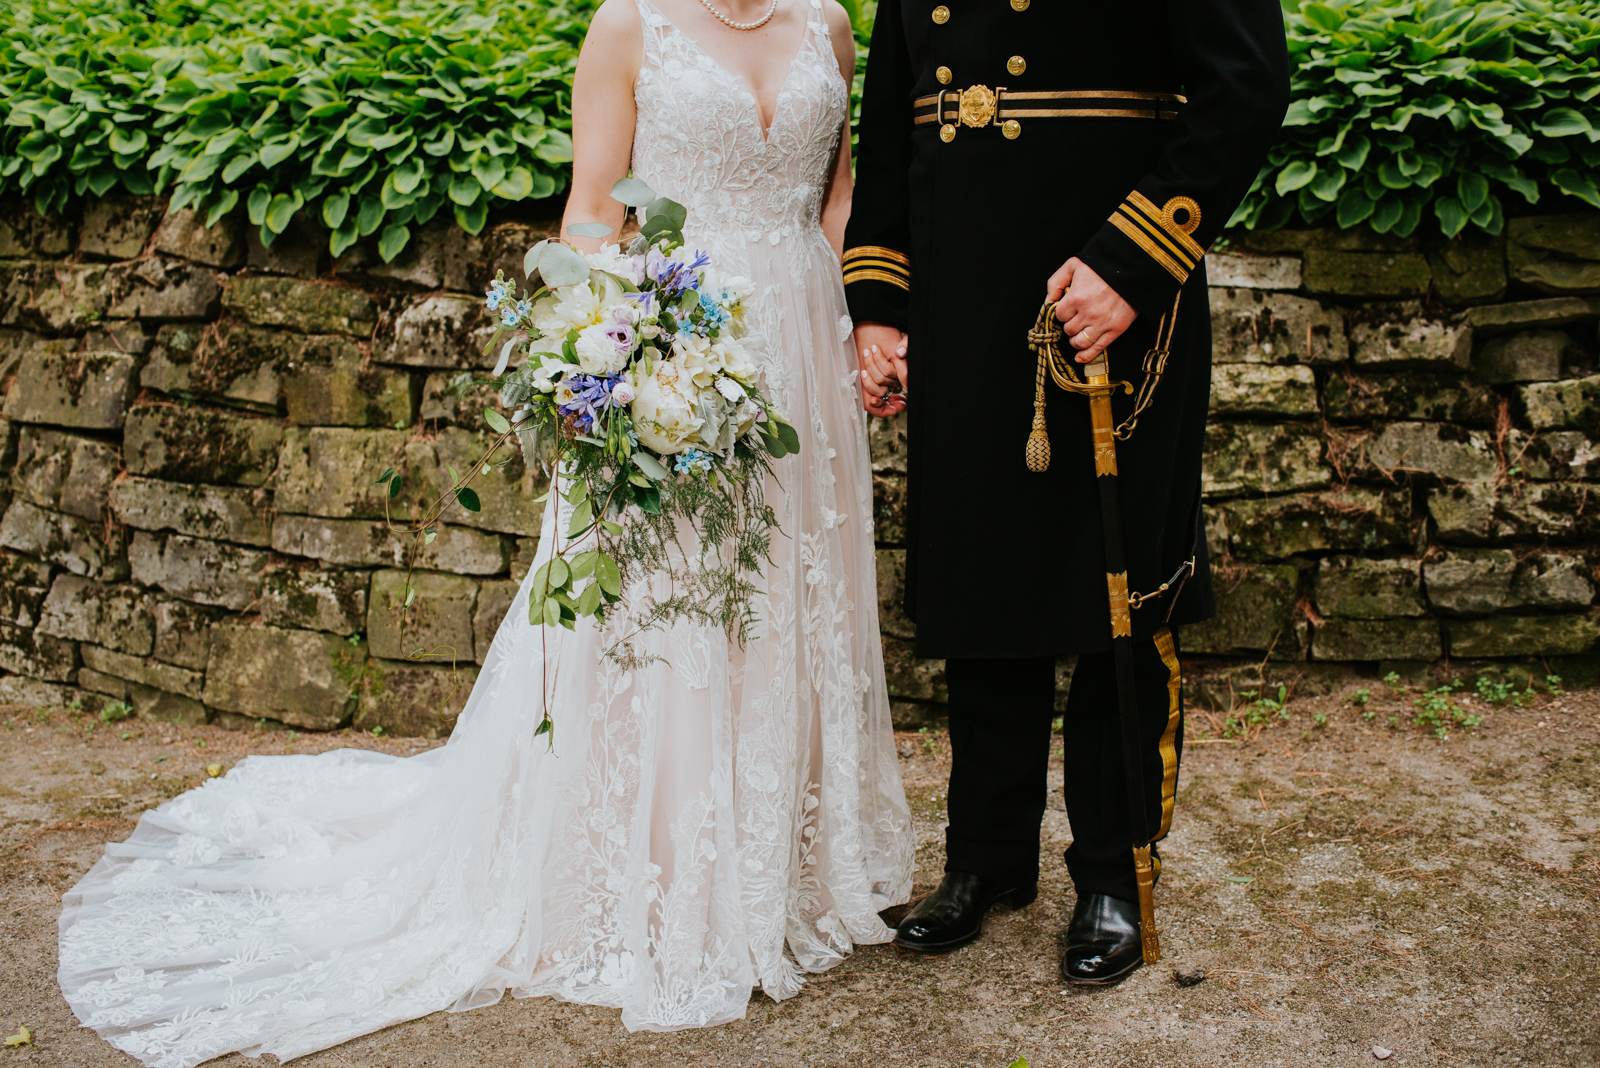 bride and groom in canadian navy uniform with sword holding hands in front of stone wall